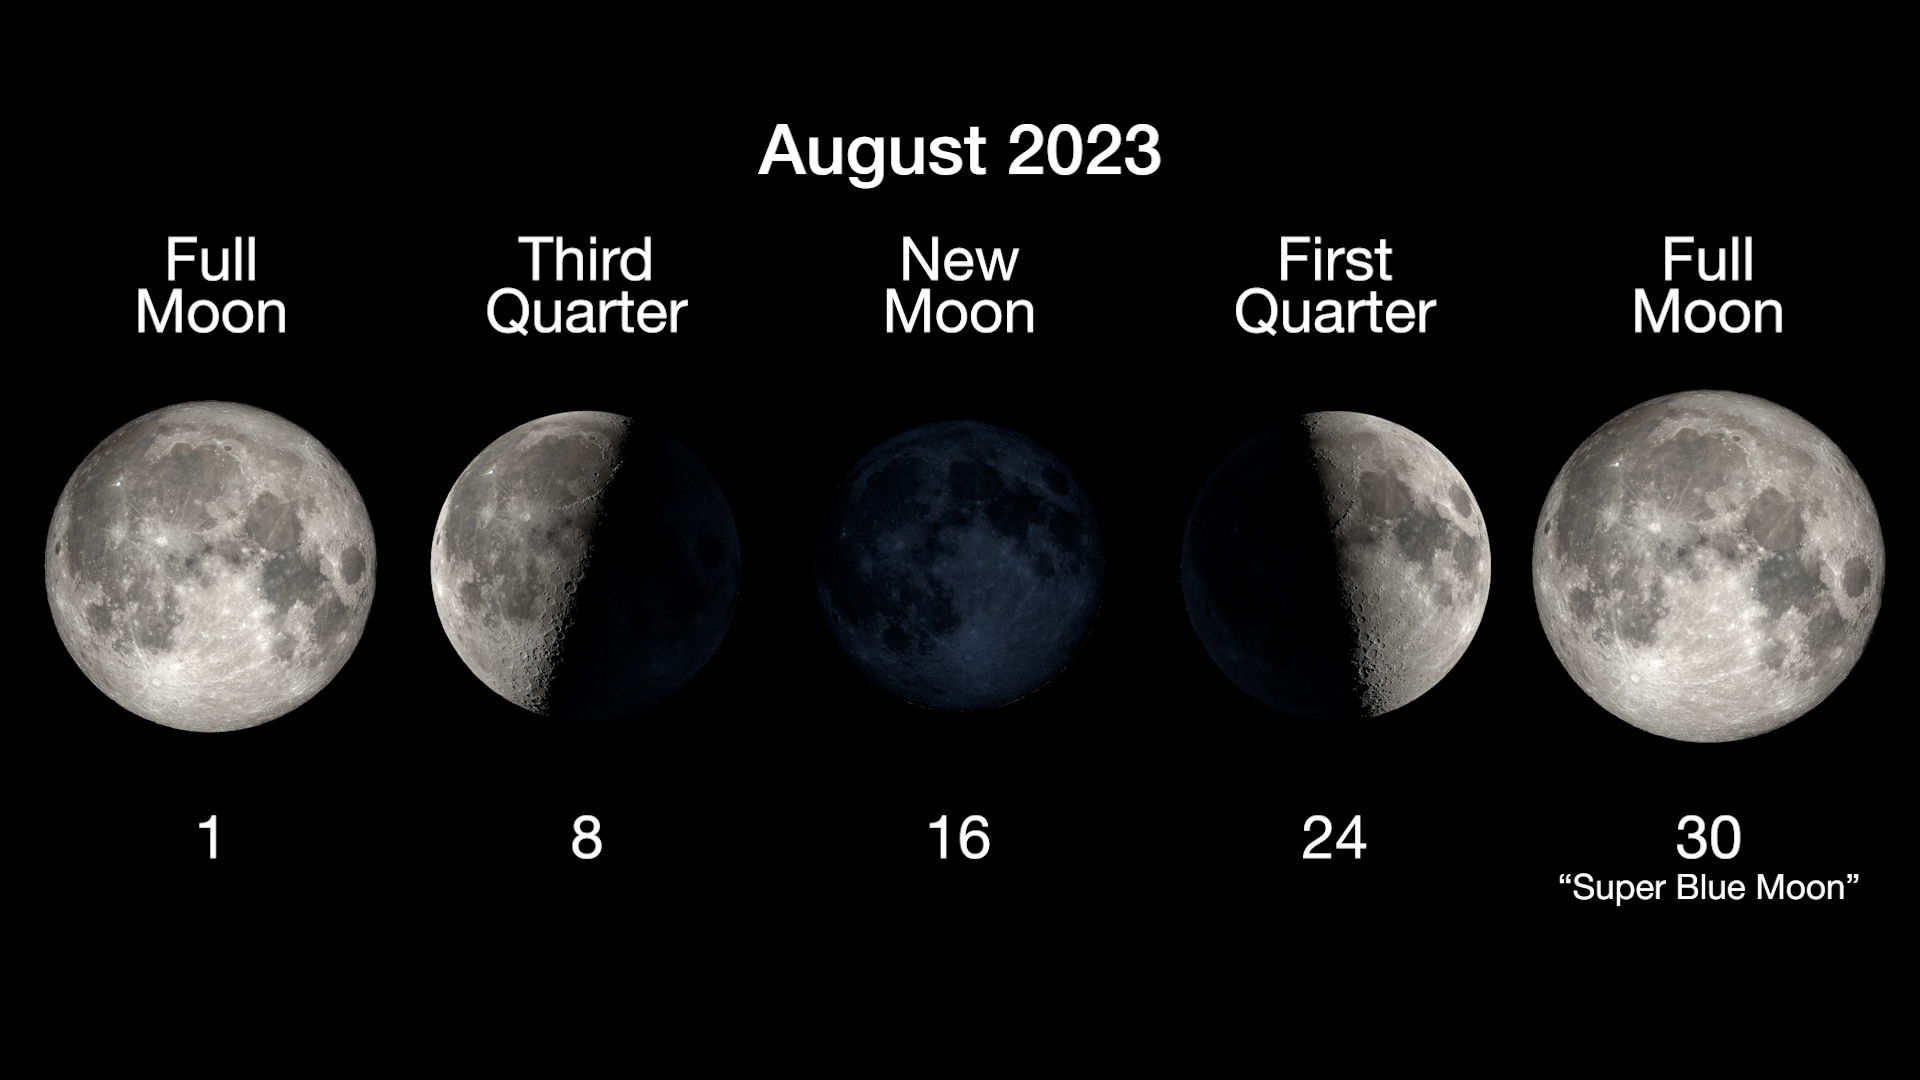 The main phases of the Moon are illustrated in a horizontal row, with the full moon on August 1, third quarter on August 8, new moon on August 16, first quarter on August 24, and a second full moon on August 30. The second full moon is labeled "Super Blue Moon."
